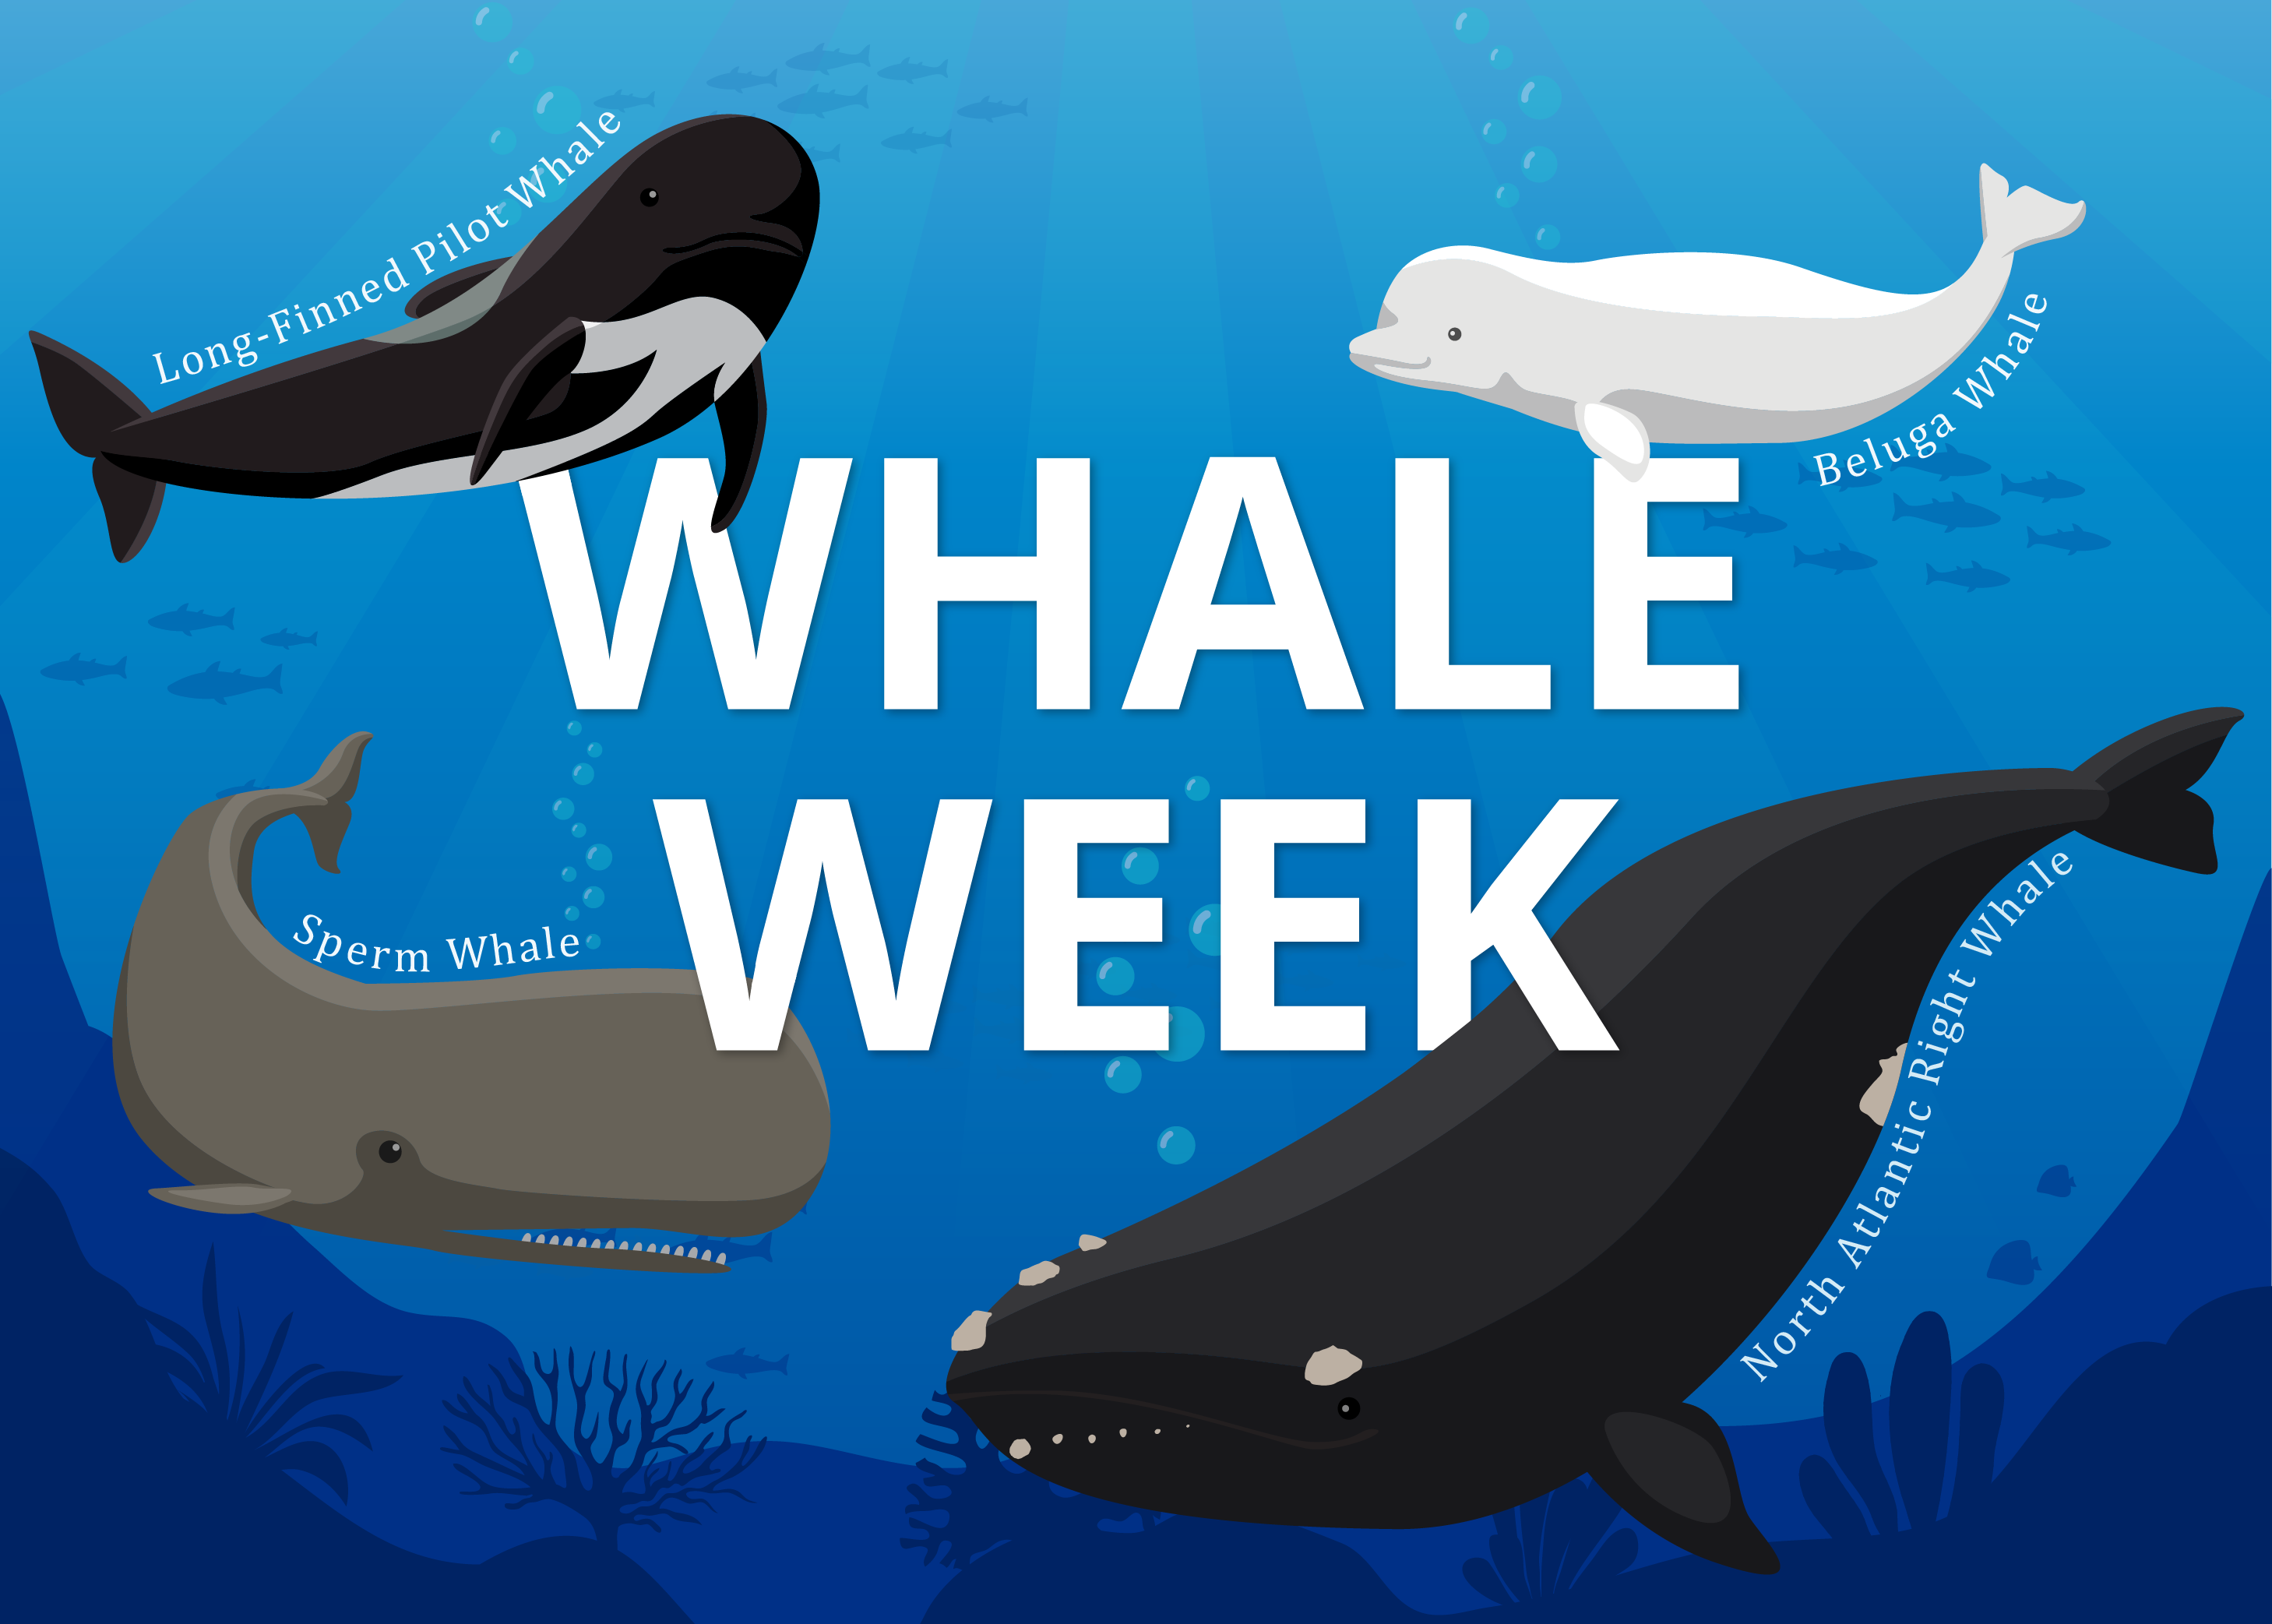 Image: Whale Week: Celebrating the Wonder of Whales